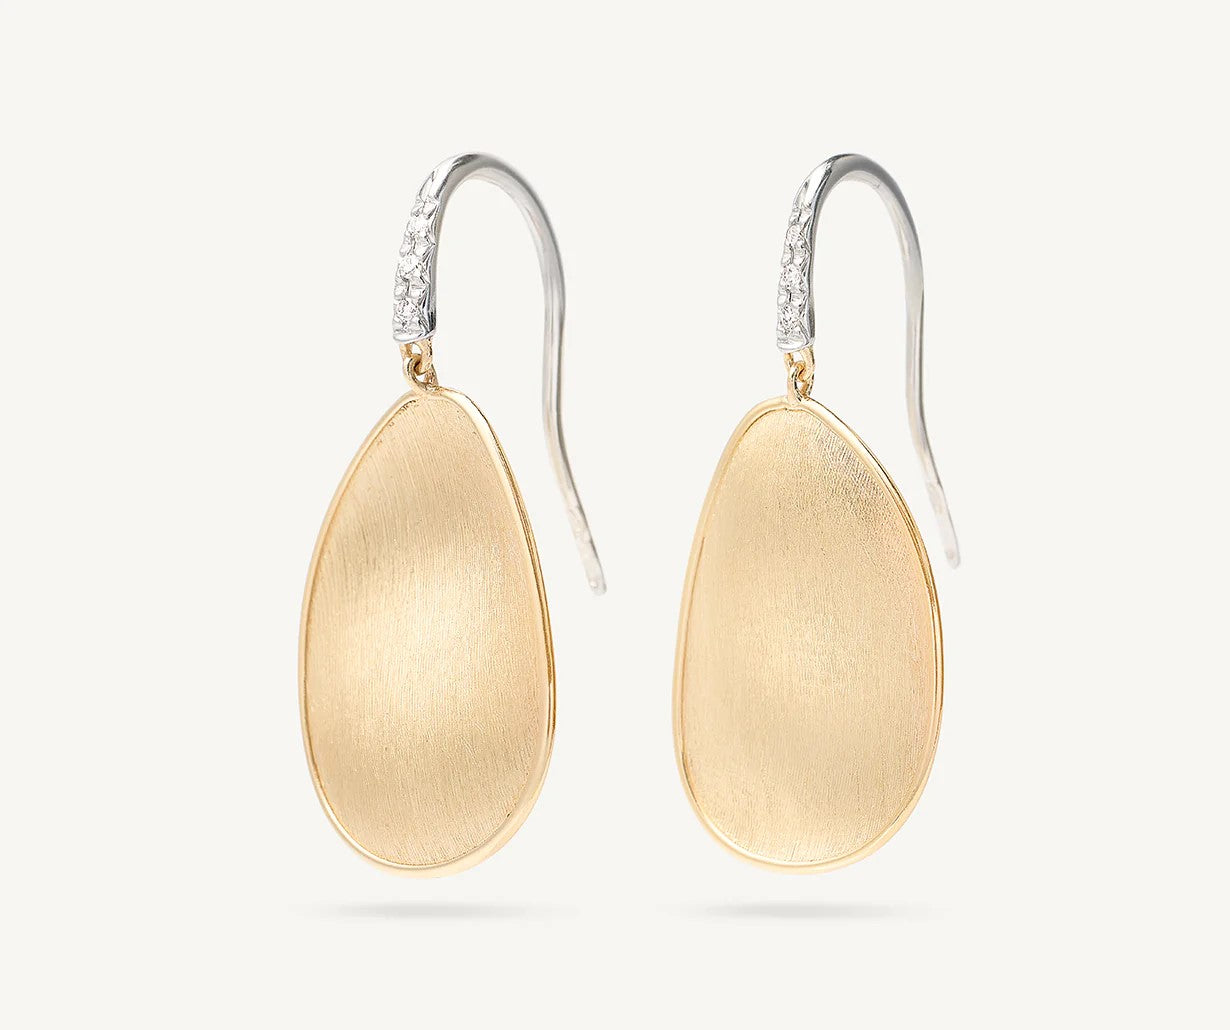 18K YELLOW GOLD MEDIUM PETAL DROP EARRINGS WITH DIAMONDS FROM THE LUNARIA COLLECTION